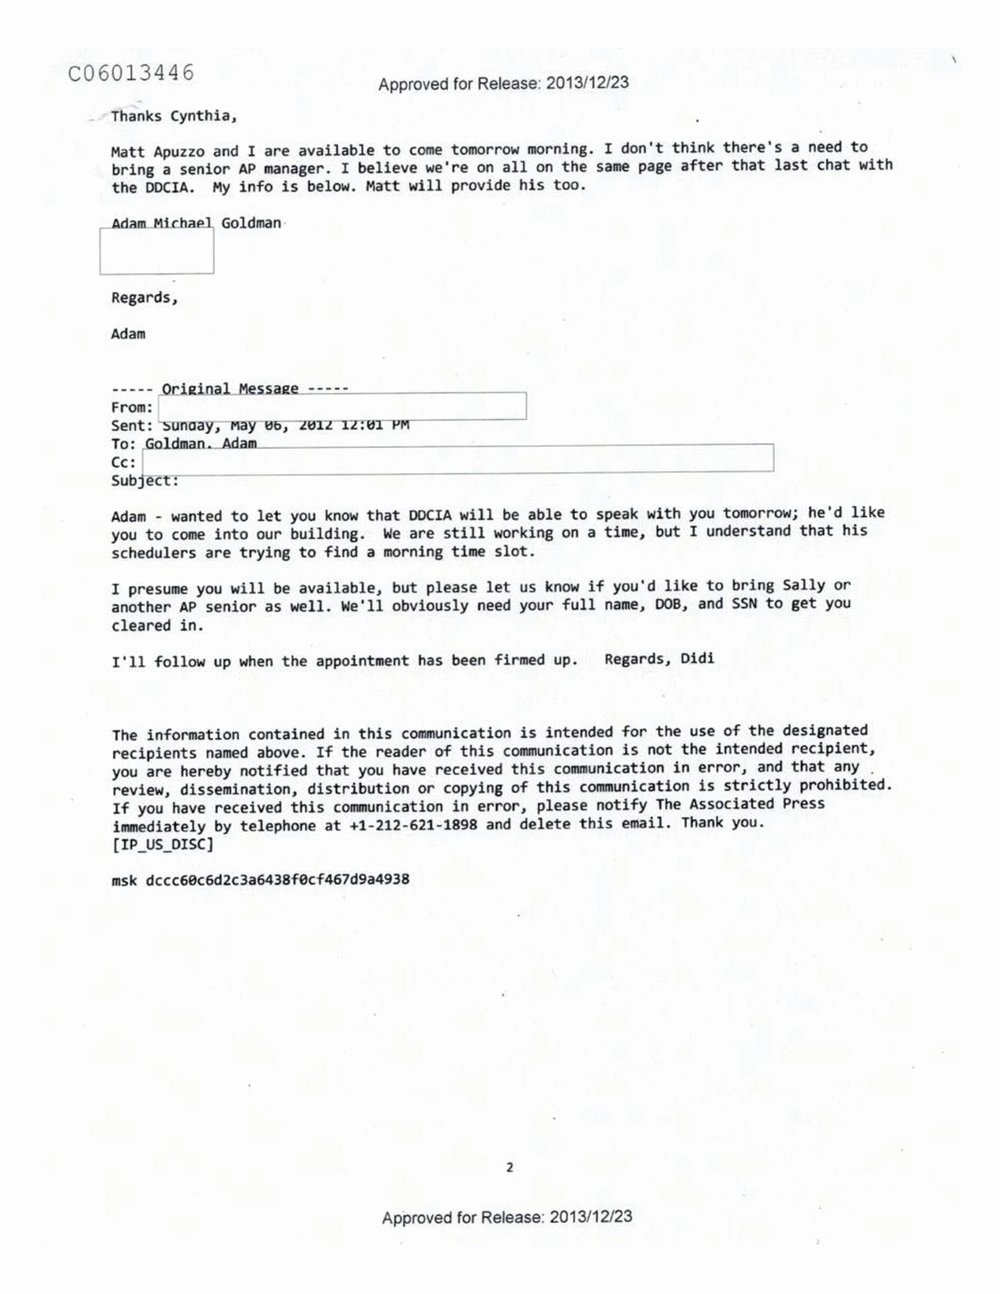 Page 309 from Email Correspondence Between Reporters and CIA Flacks